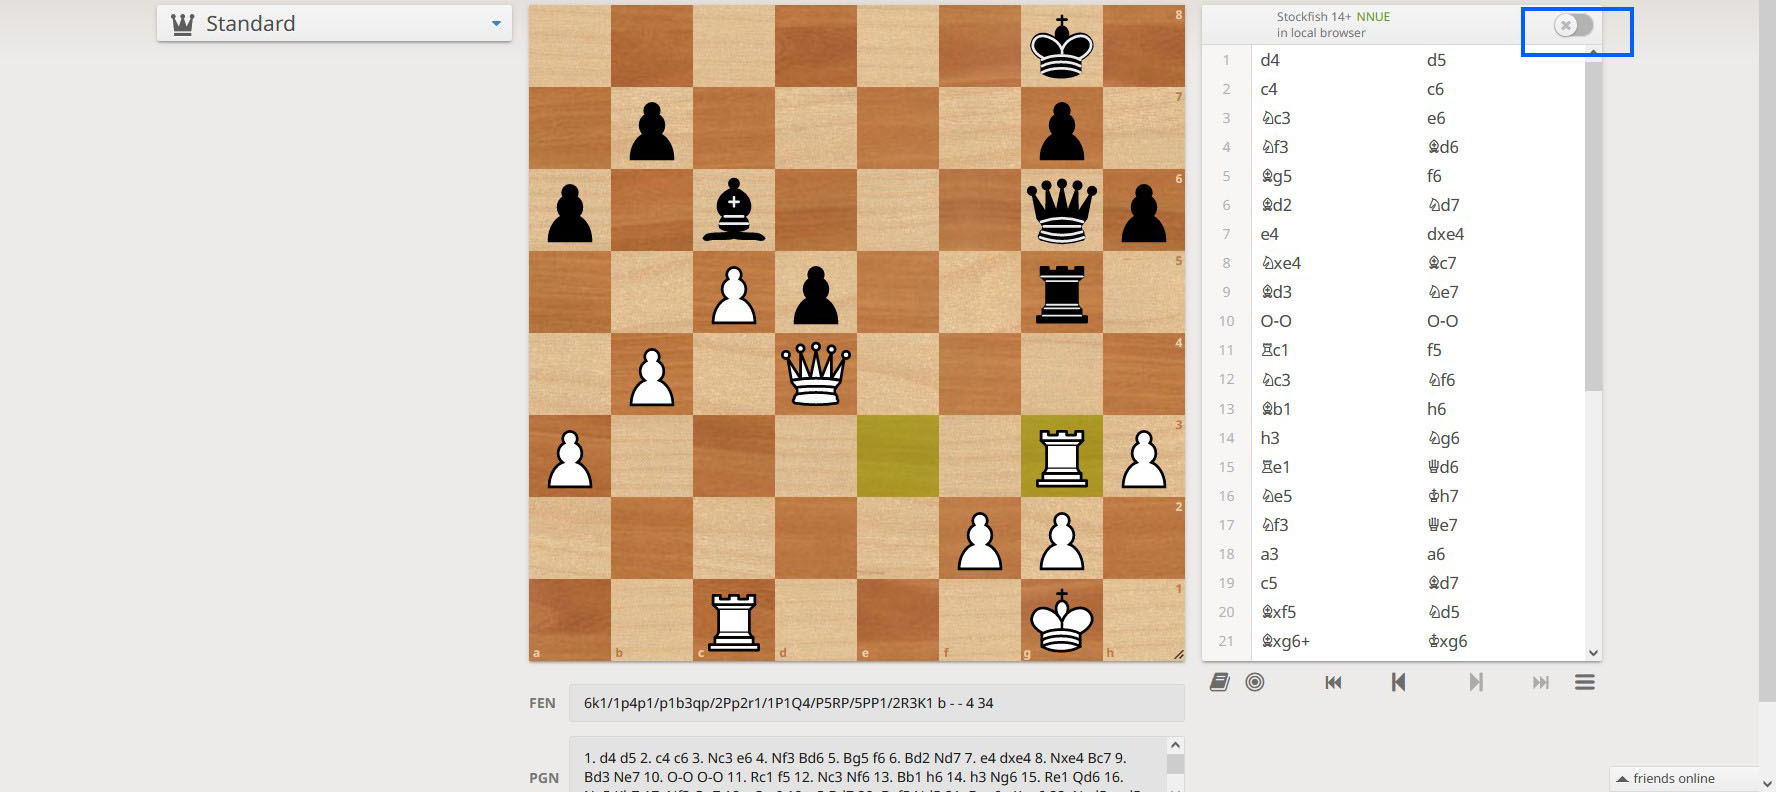 How To Analyze Your Games With Stockfish On Chess.com Or Lichess 